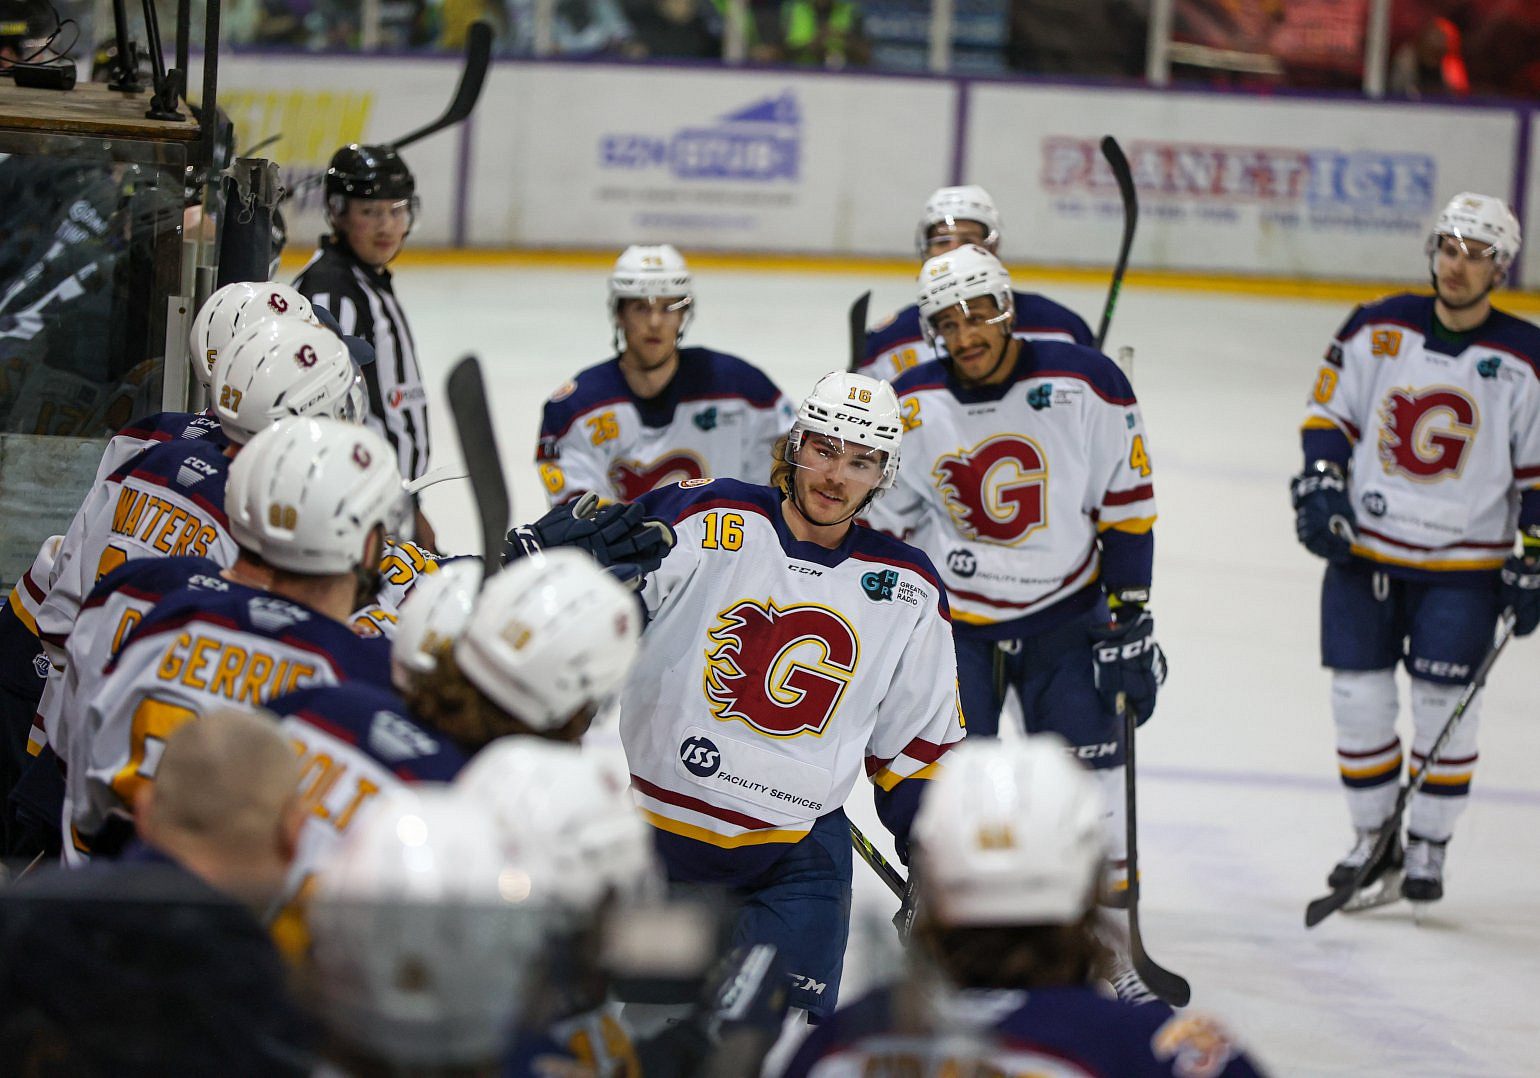 The Guildford Flames celebrate scoring on the road versus the Manchester Storm (Image: Mark Ferris)